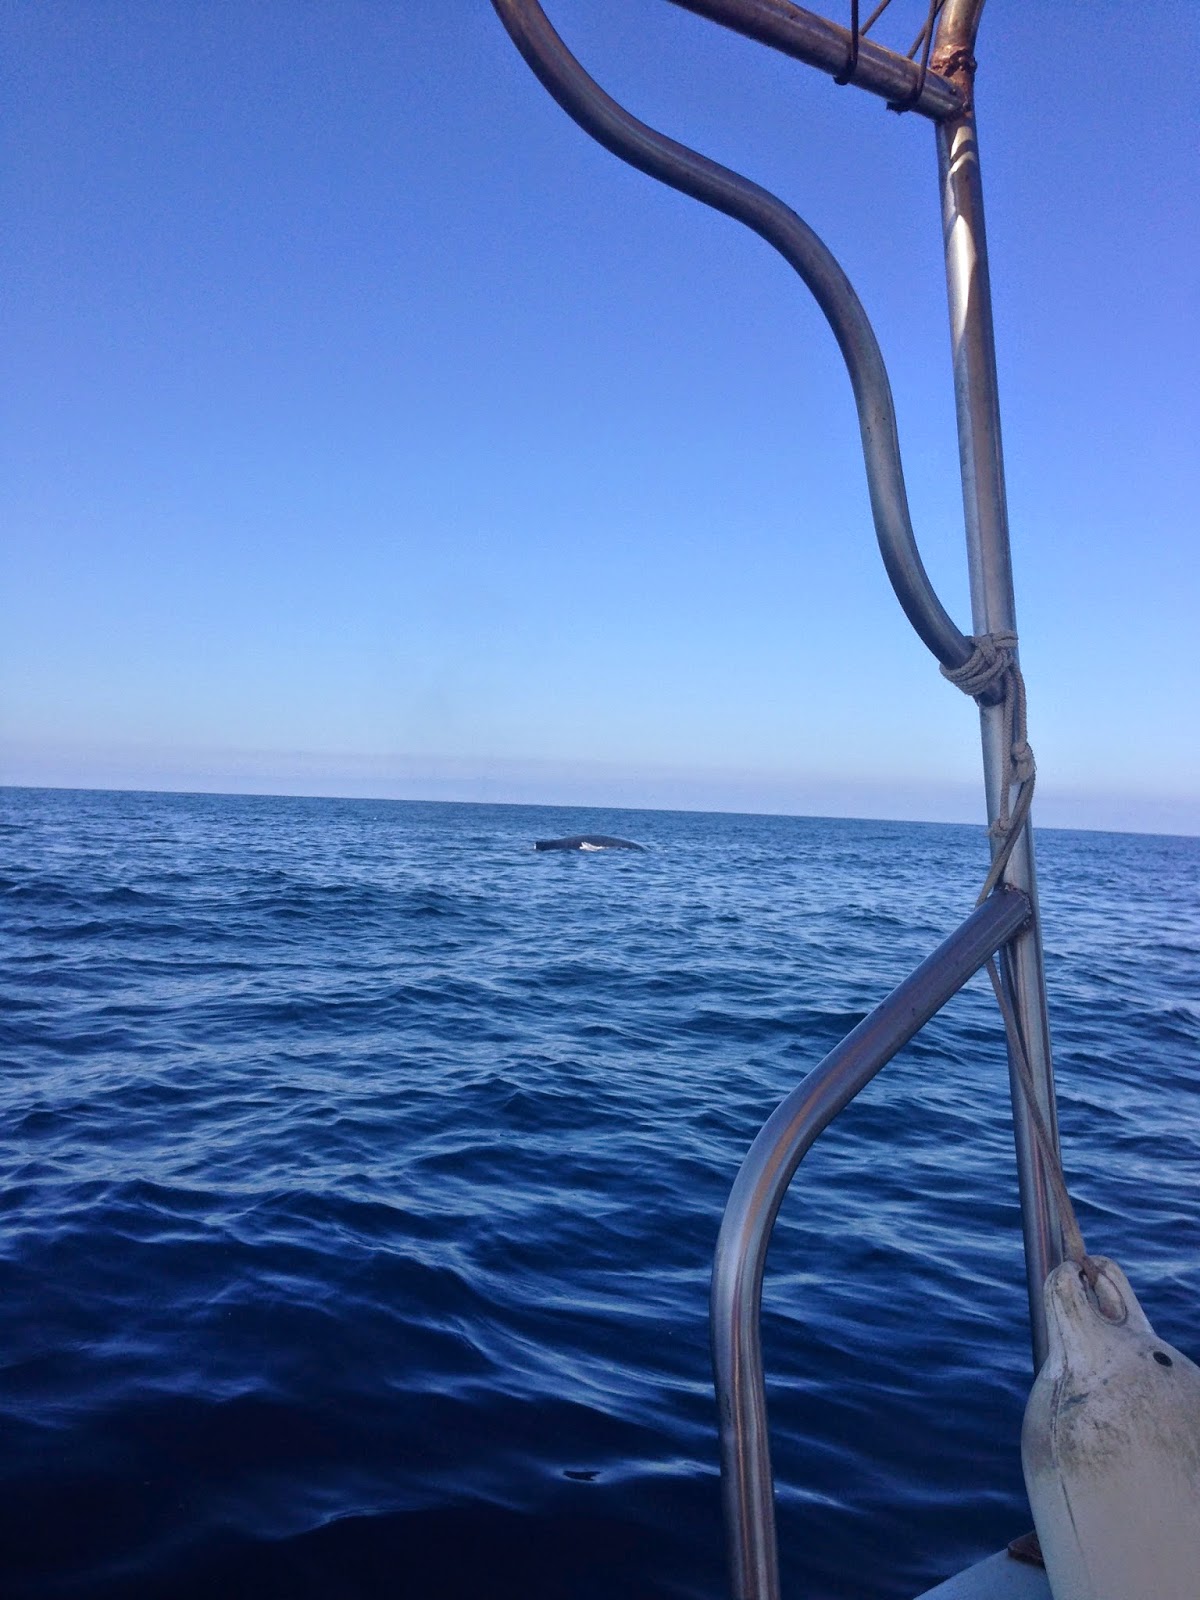 All This Is That: Humpback whales, Pelicans, and boats on a boat trip near Chacala, Nayarit